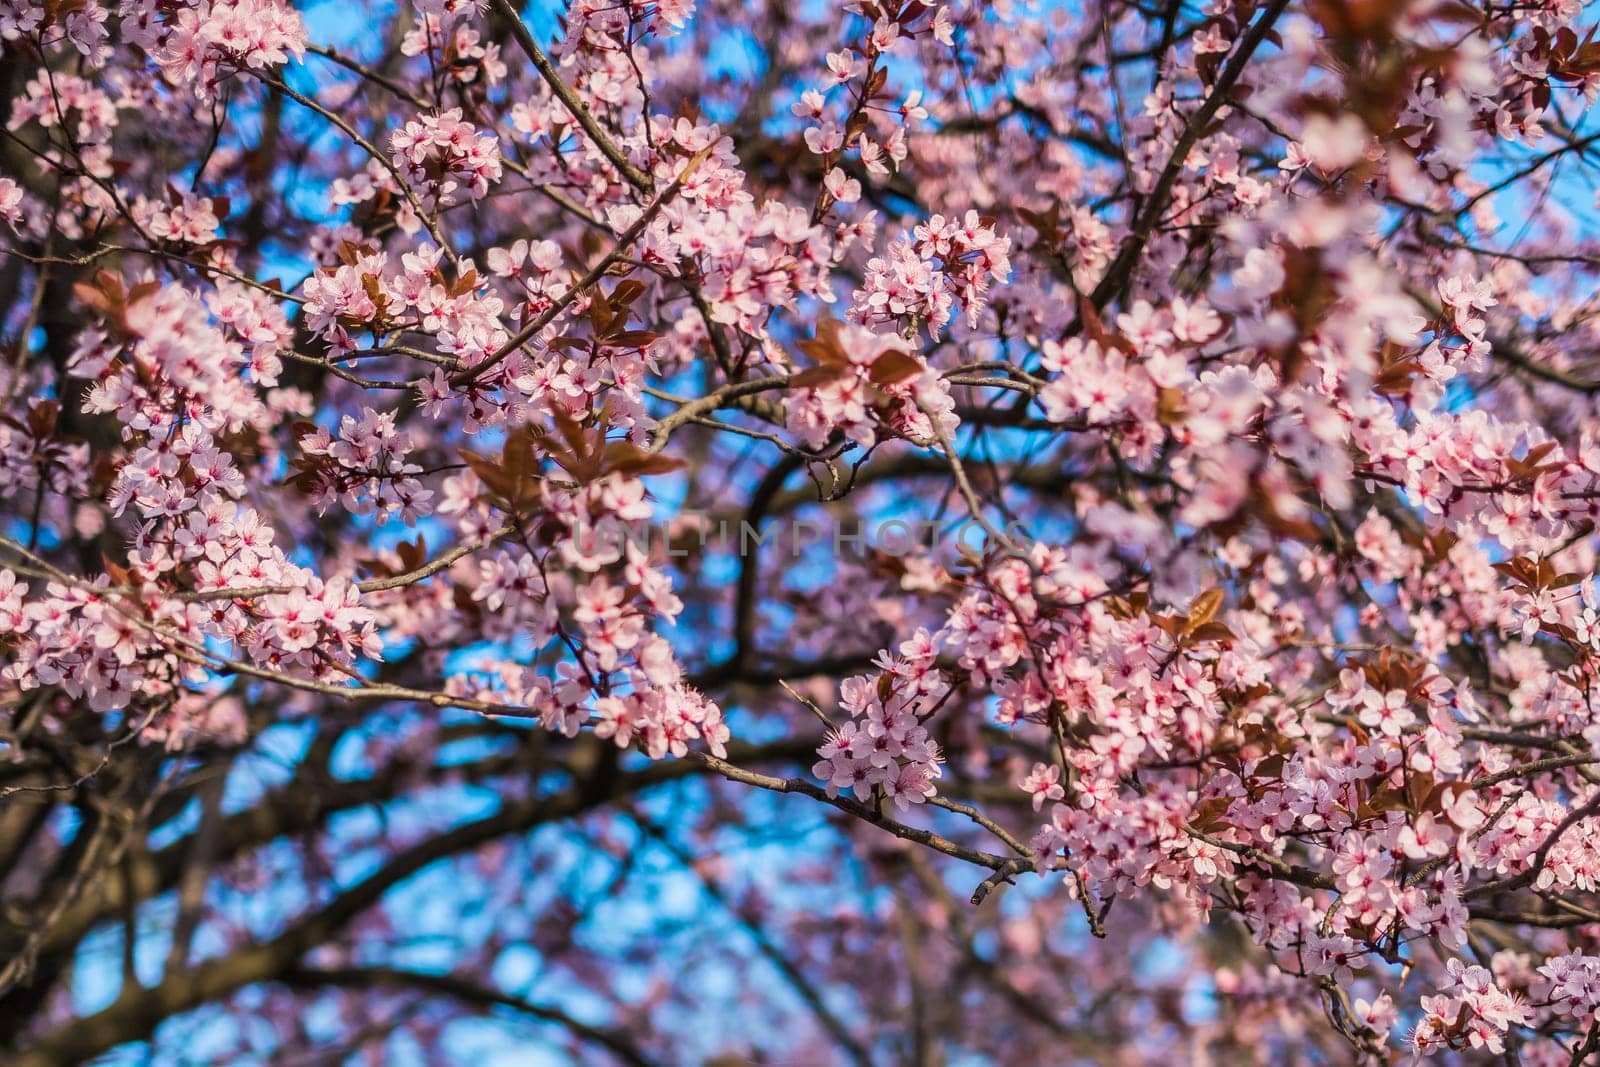 Selective focus of beautiful branches of pink Cherry blossom on the tree under blue sky, Beautiful Sakura flowers during spring season in the park, Nature floral background with copy space. Blooming and blossom.